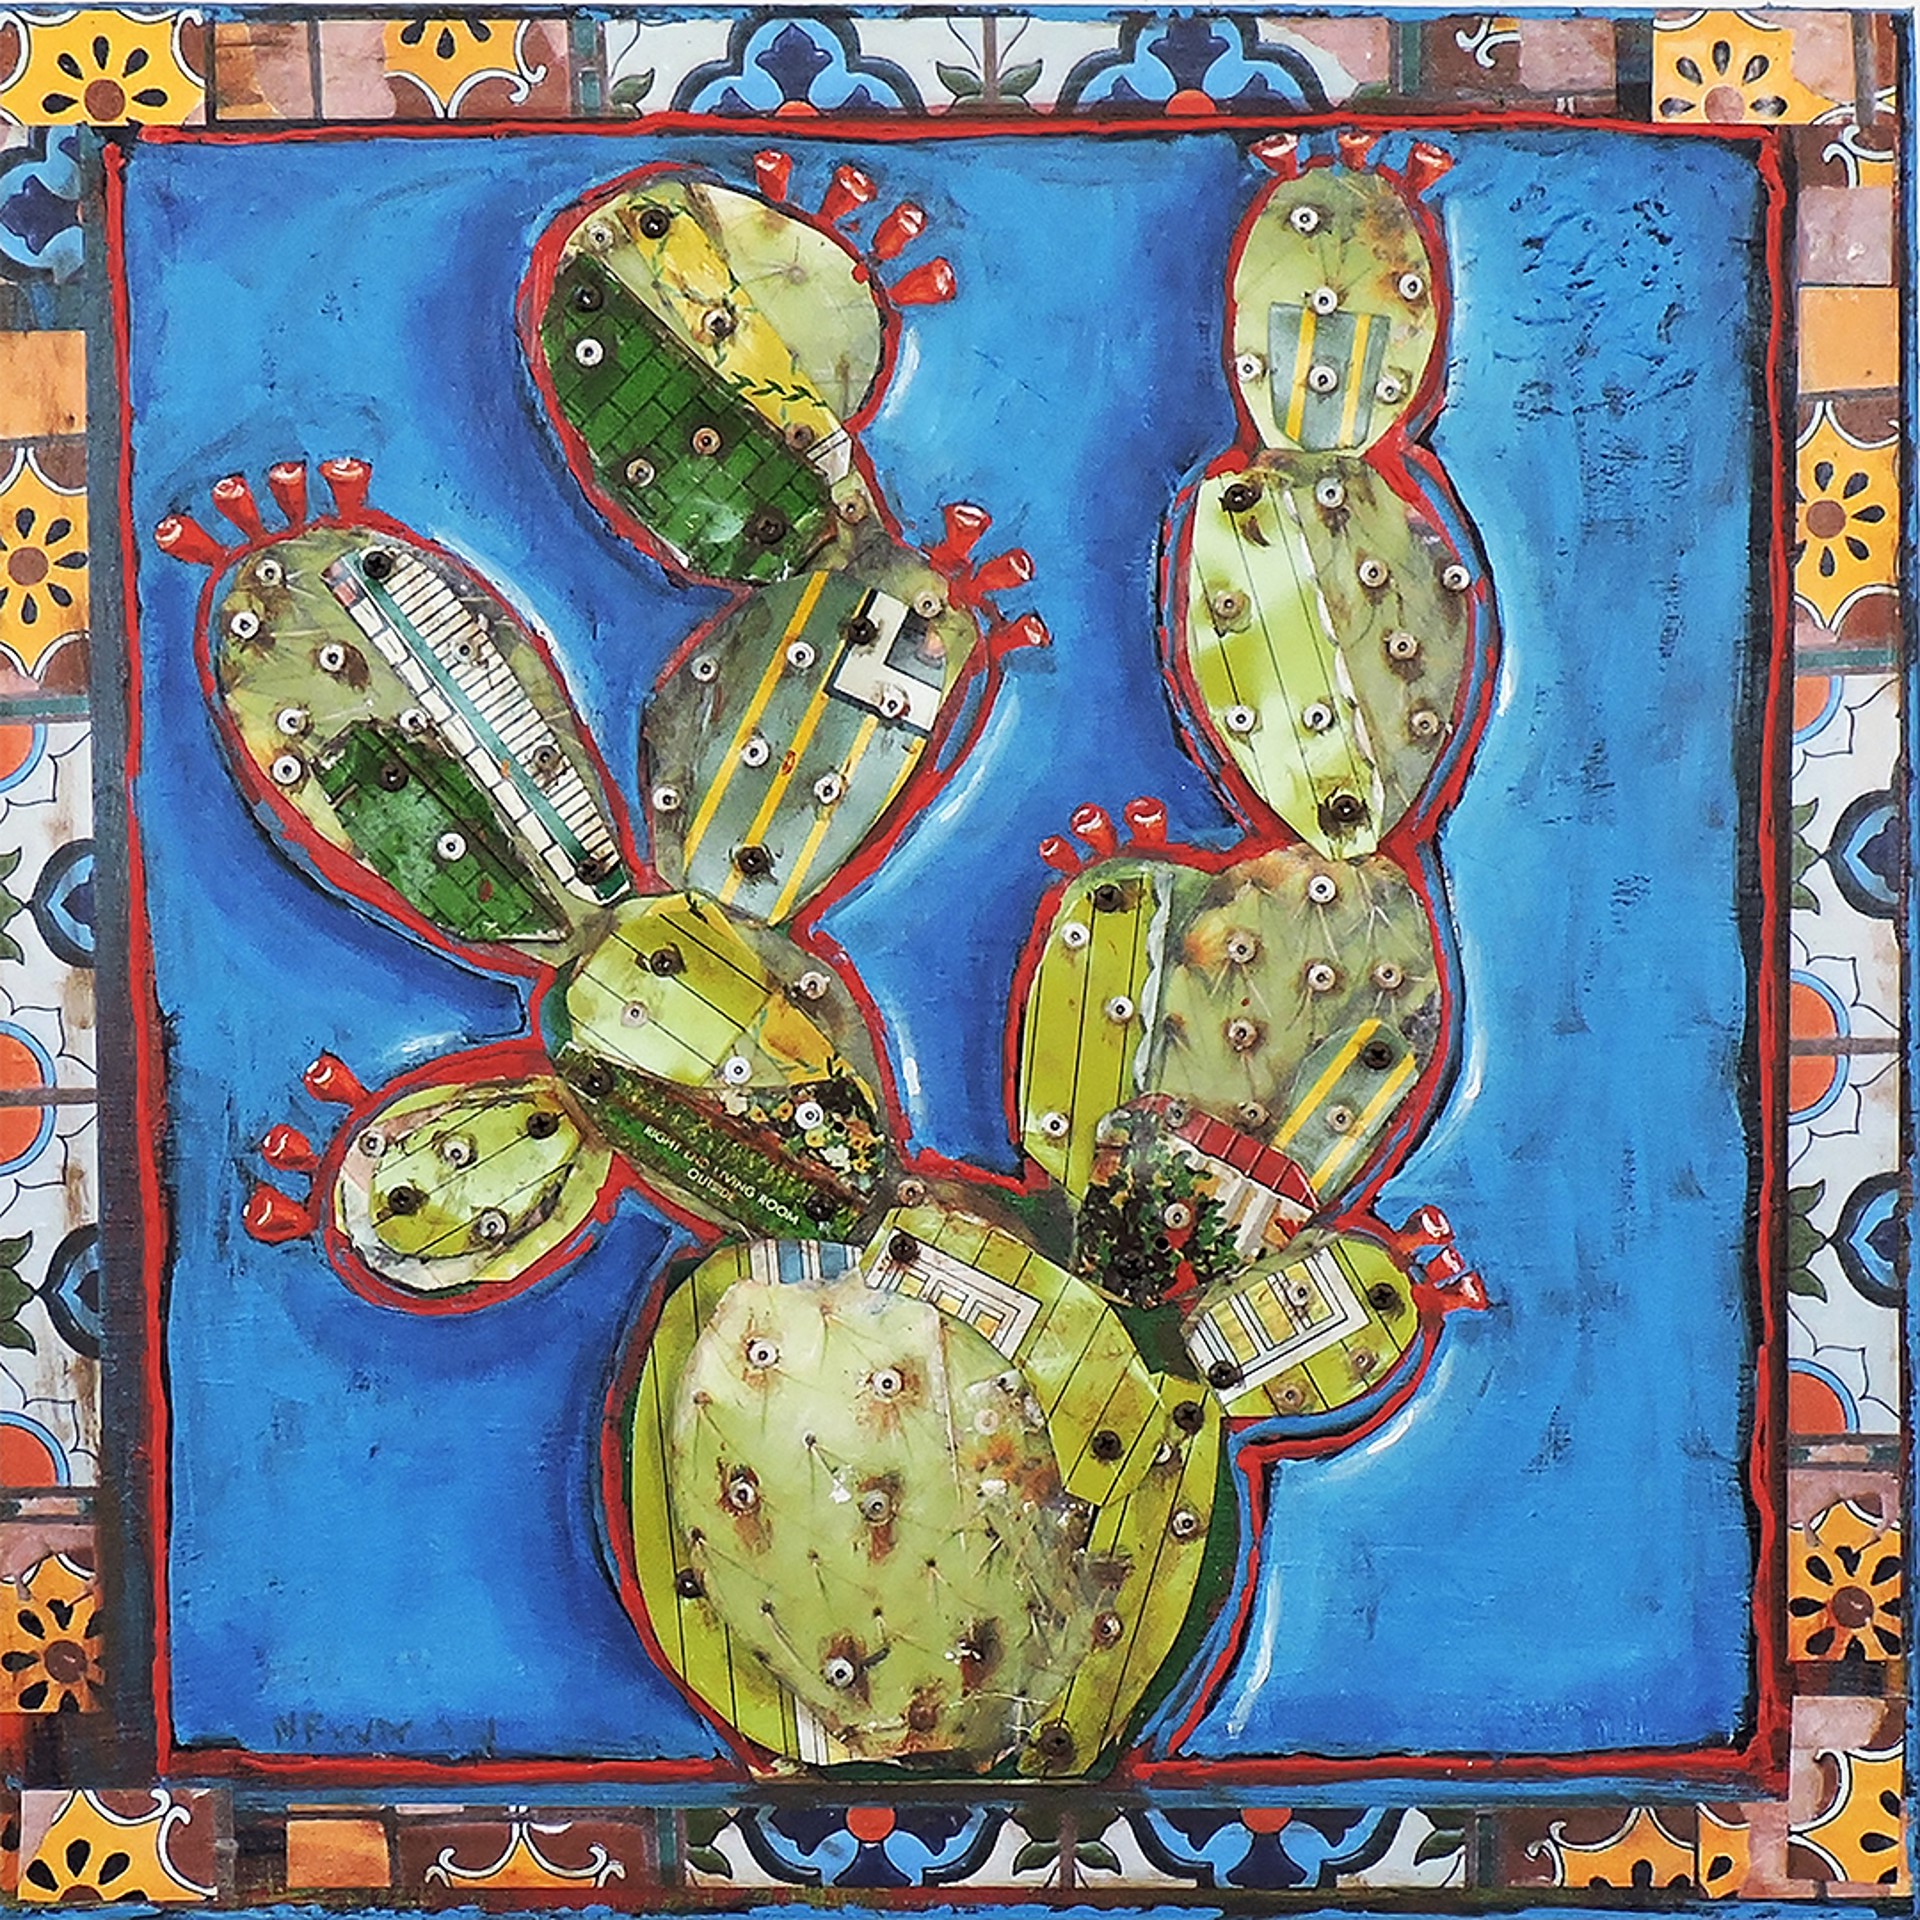 Prickly Pear & Tile Border by Dave Newman